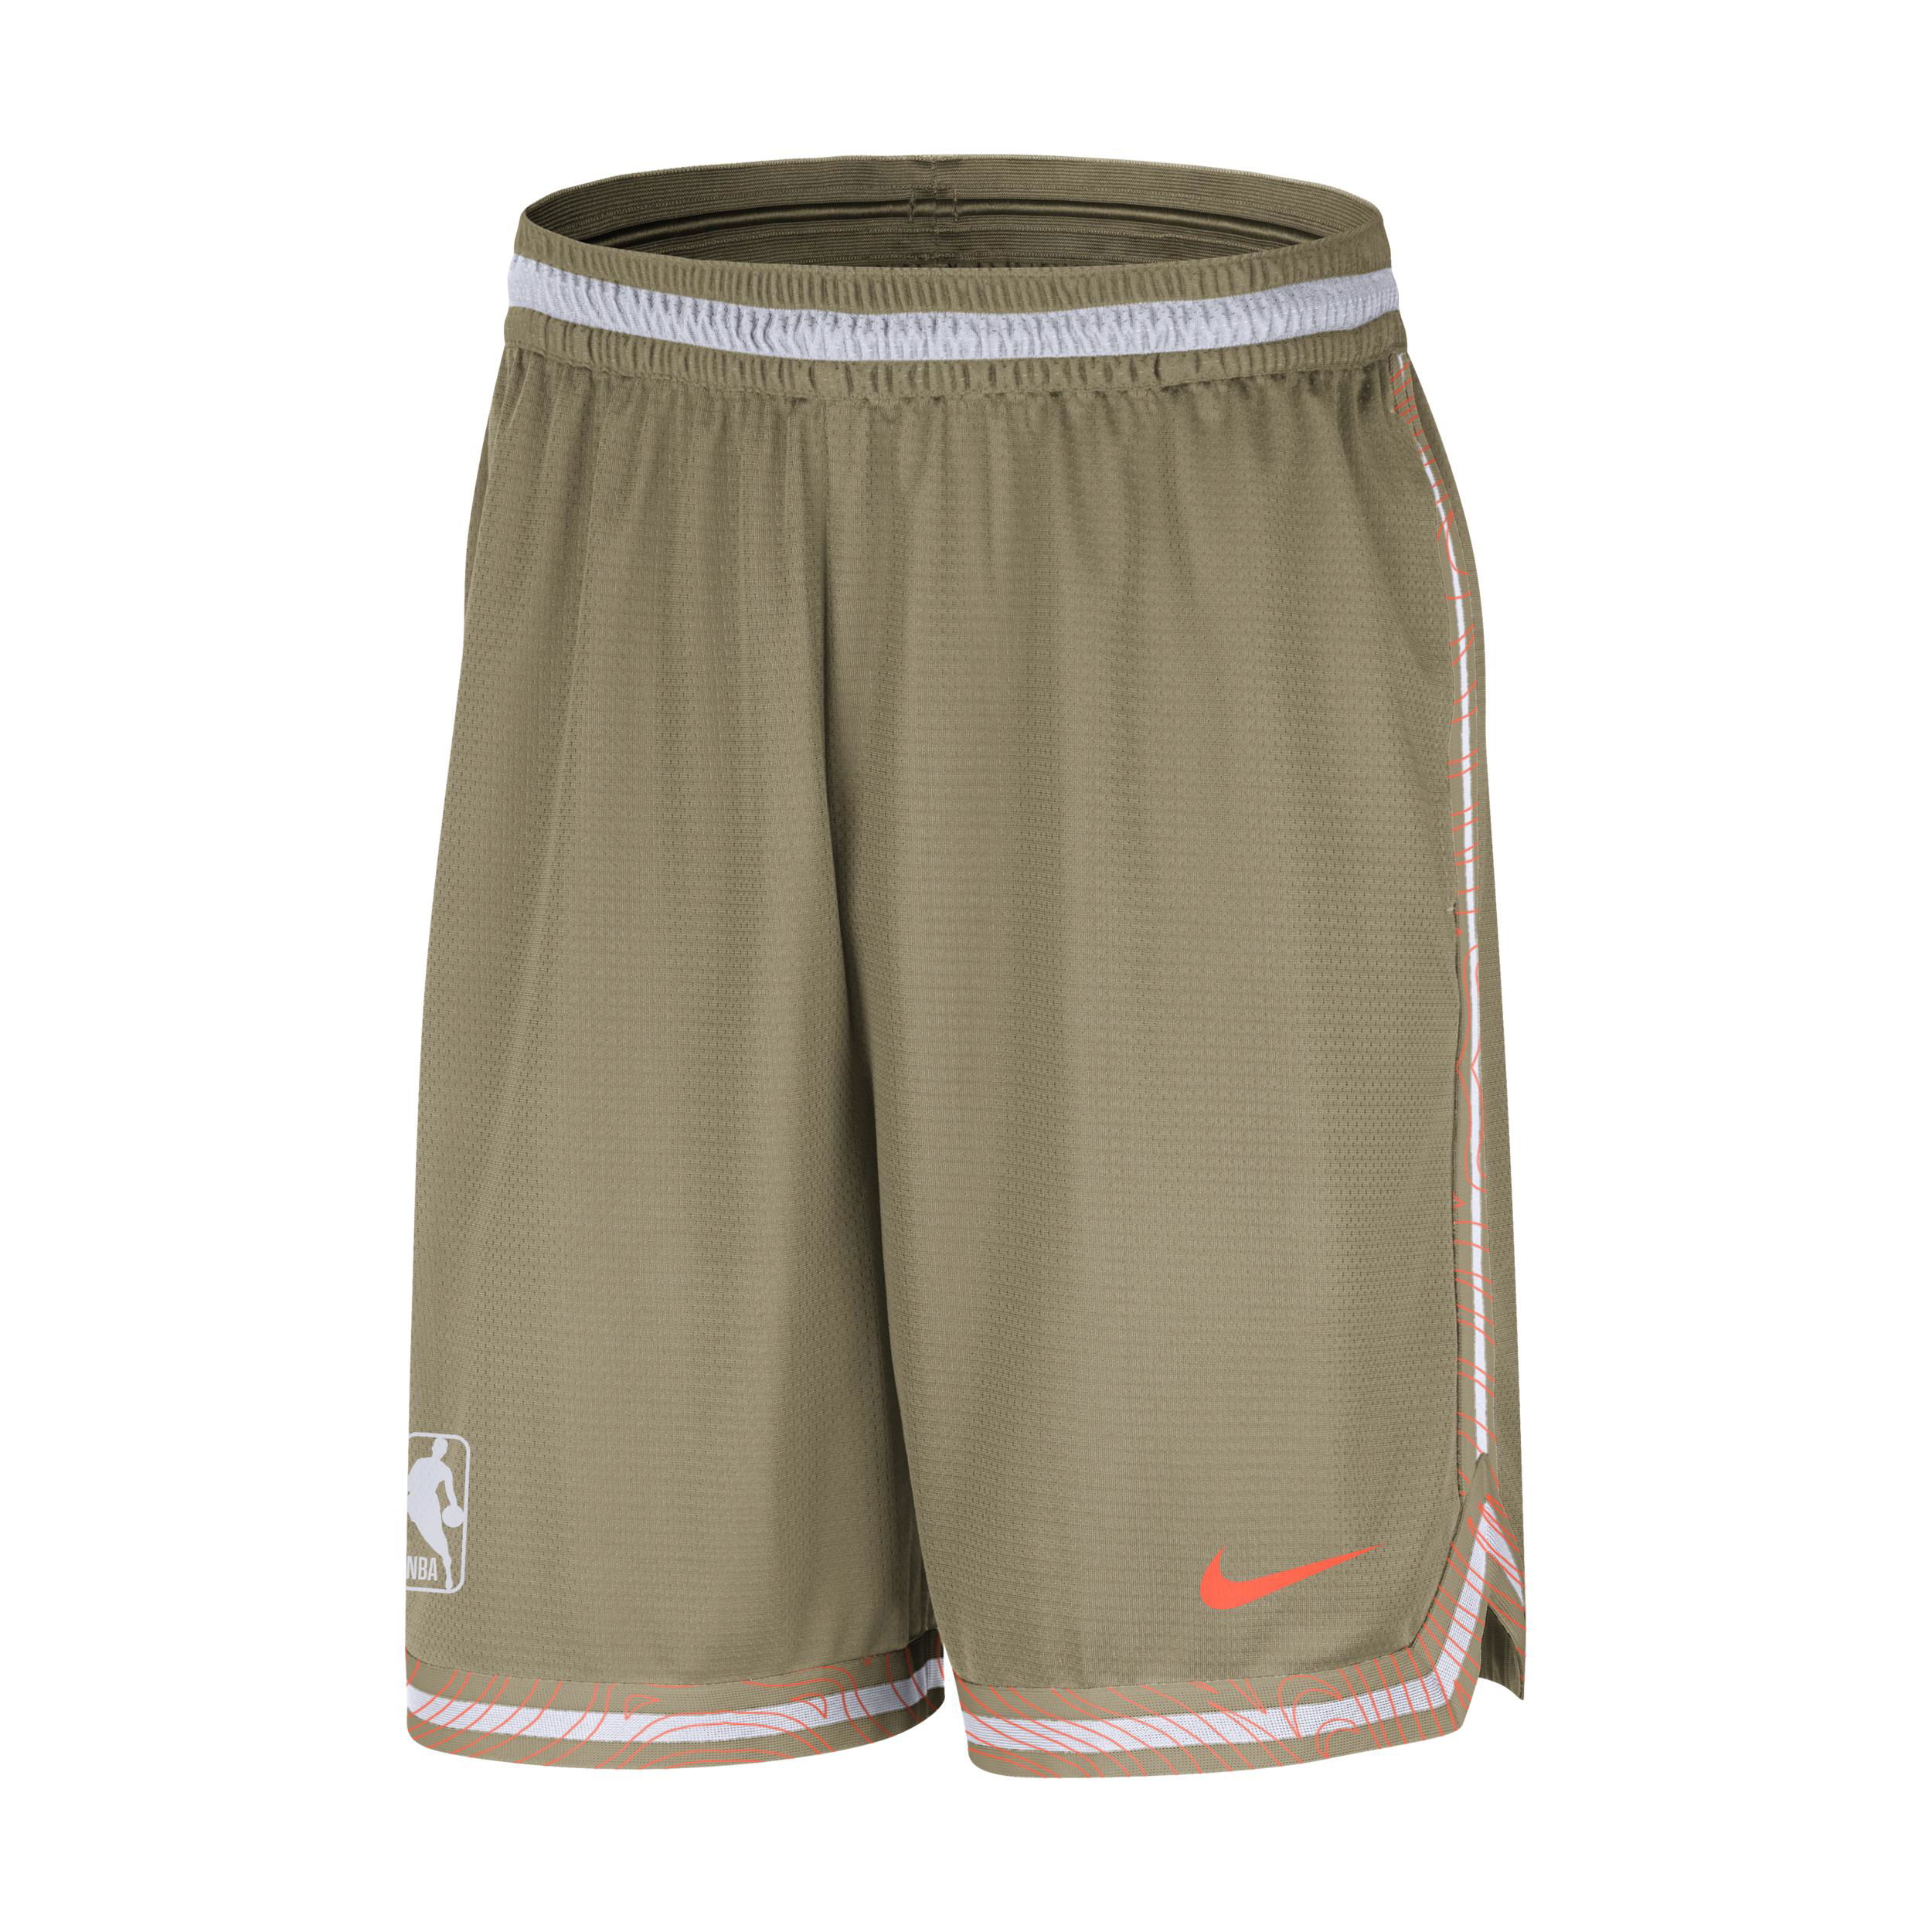 Team 31 DNA Nike Men's Dri-FIT 8" Unlined NBA Shorts by NIKE